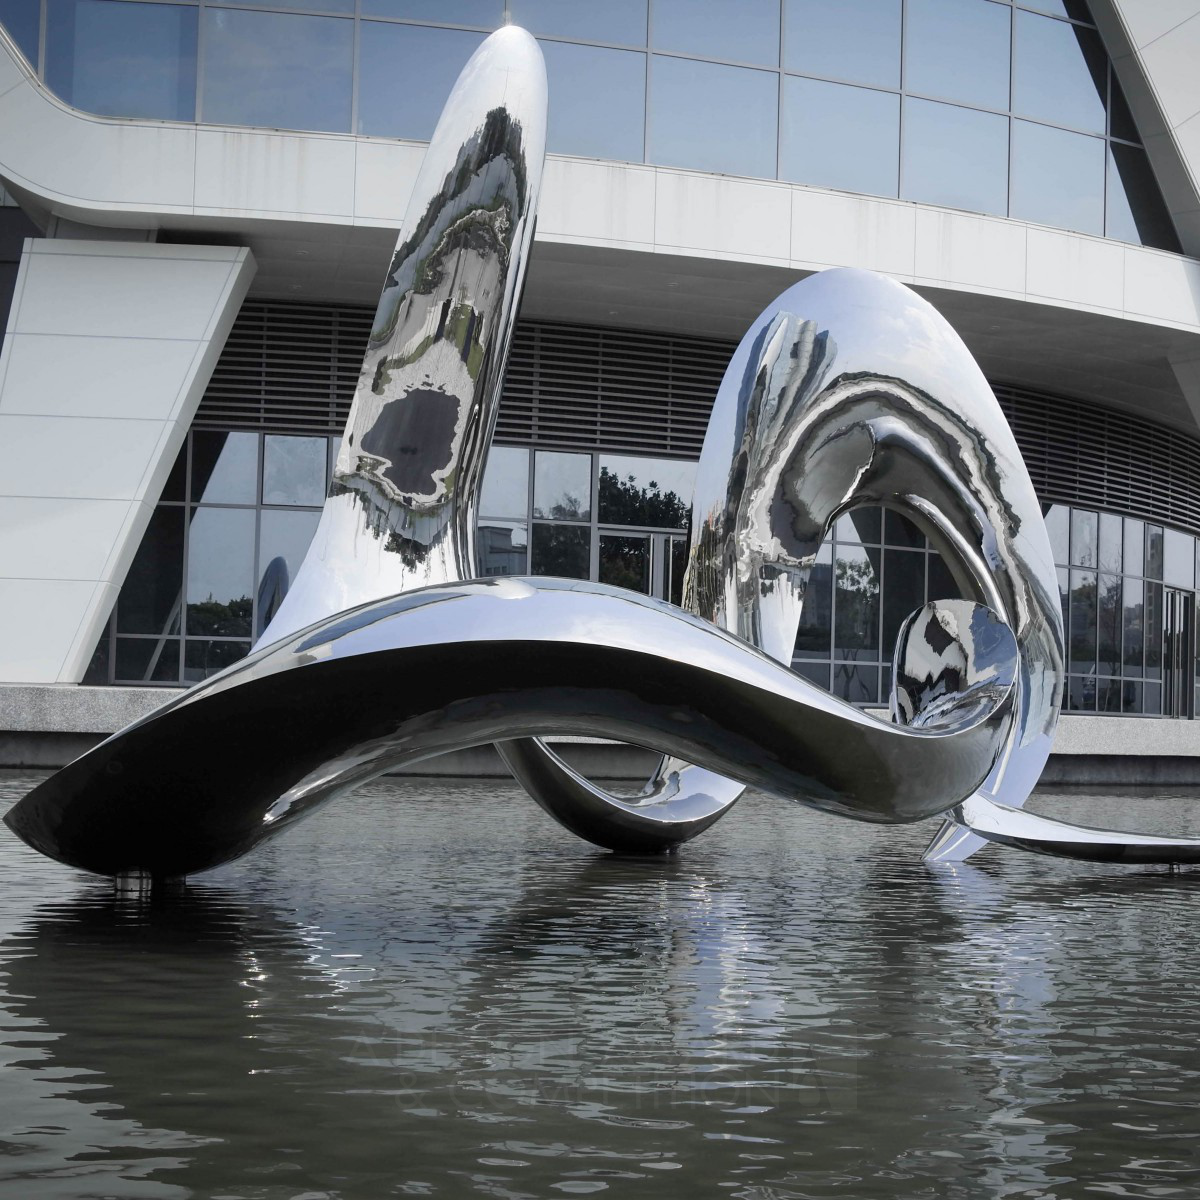 Flow With The Sprit Of Water Public Art by Iutian Tsai